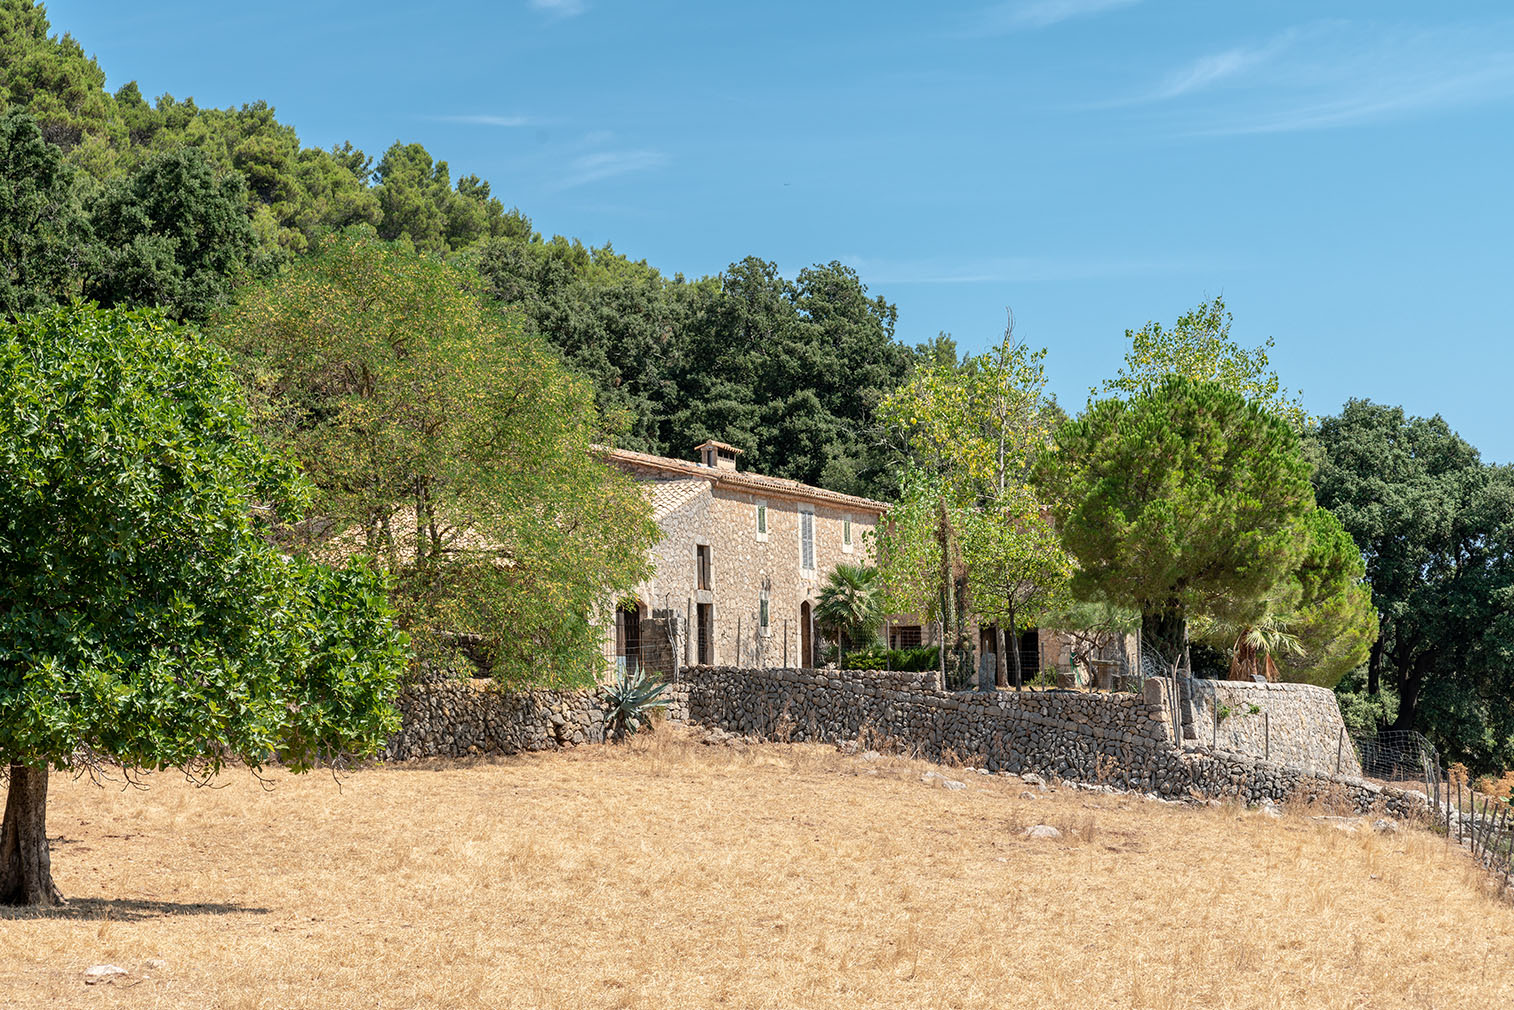 Mountainside Mallorcan finca with 550 acres of olive groves and acorn forest hits the market